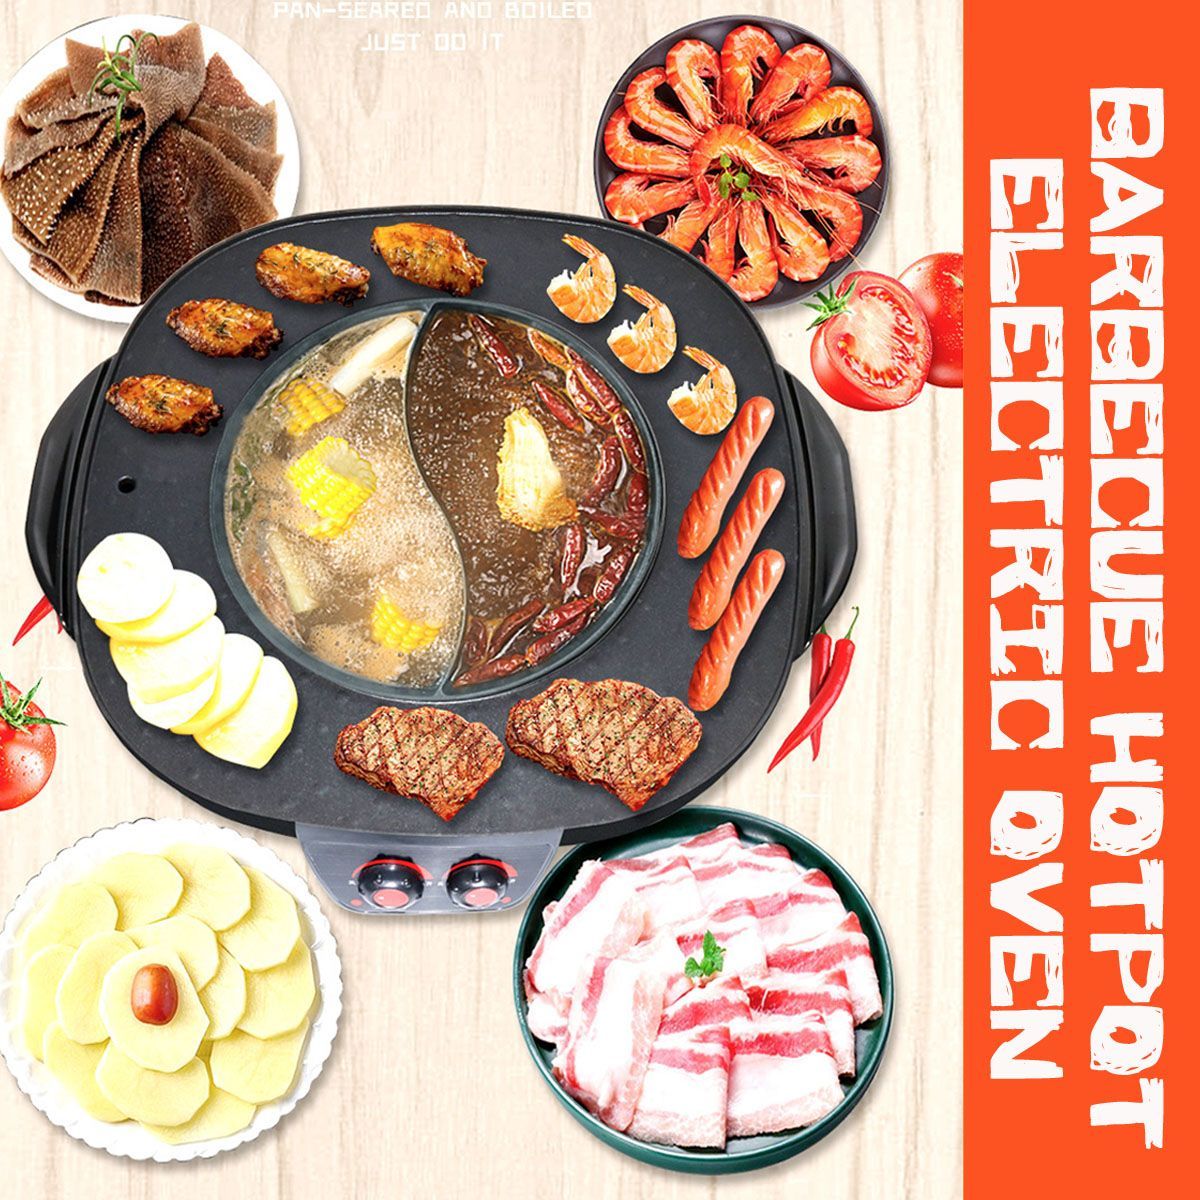 220v-2100W-Electric-Barbecue-Hotpot-Oven-Grill-Smokeless-Hotpot-Machine-BBQ-Oven-1692679